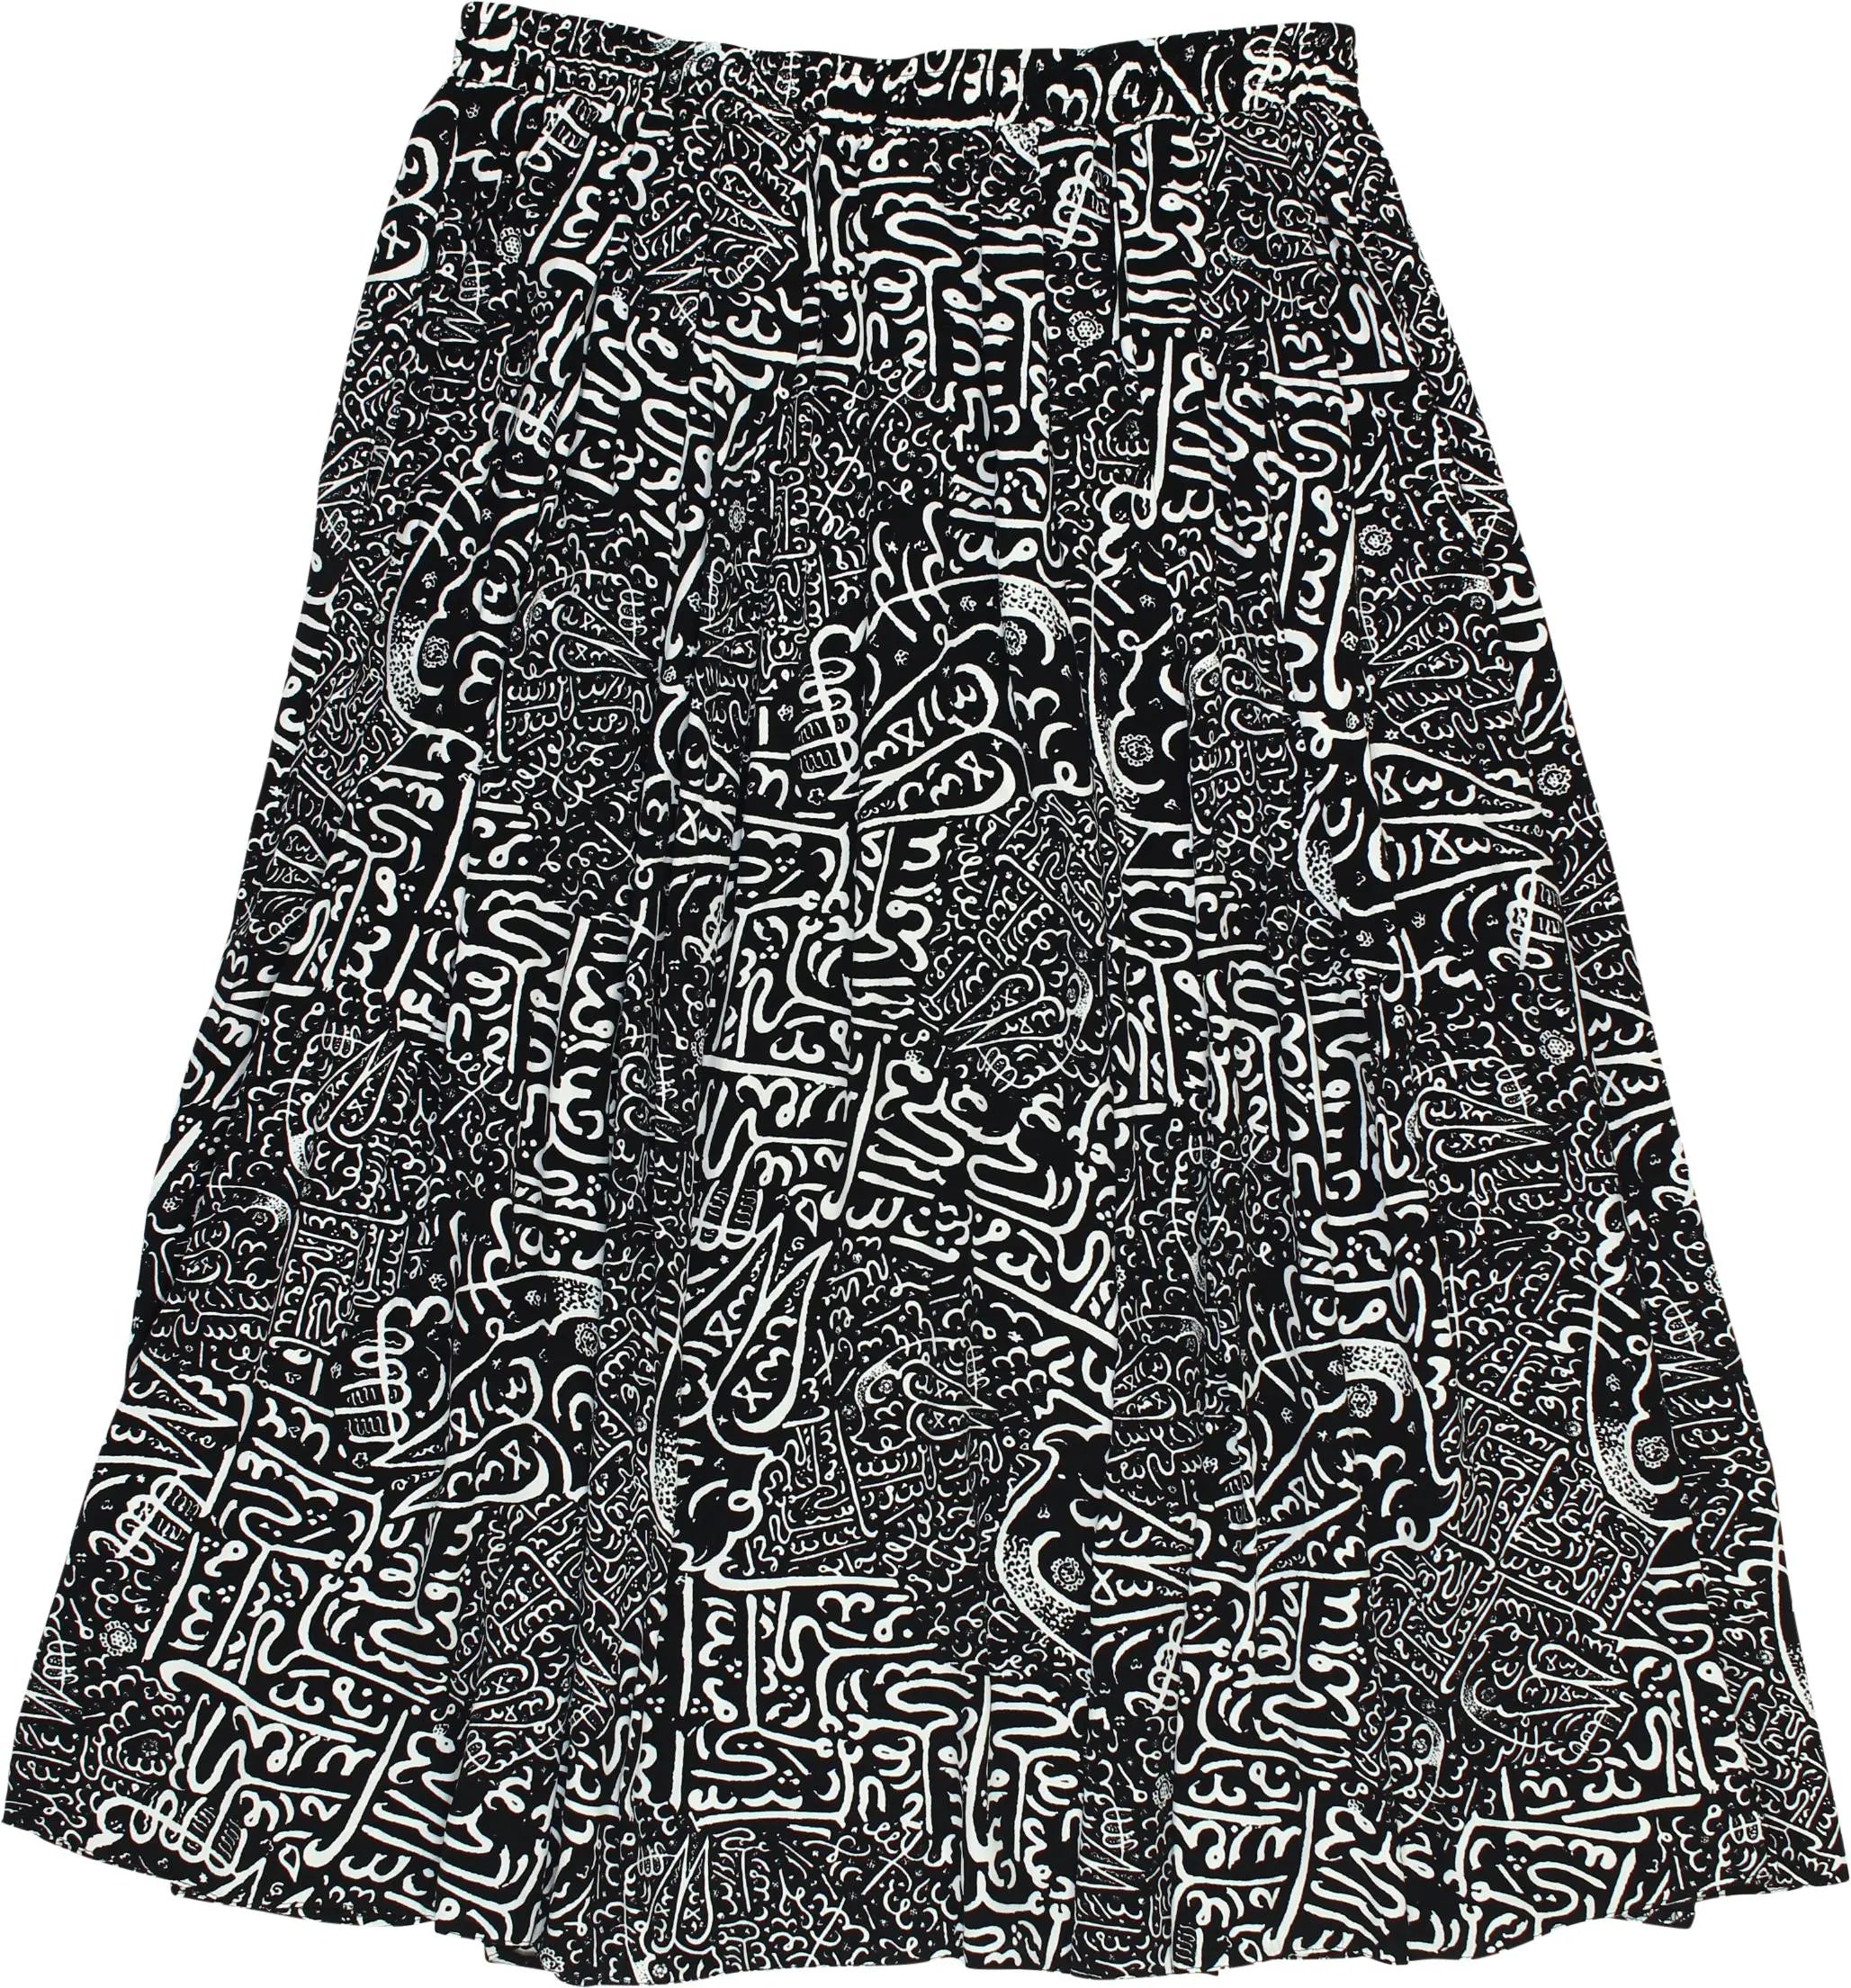 Toni Dress - 90s Black & White Patterned Skirt- ThriftTale.com - Vintage and second handclothing